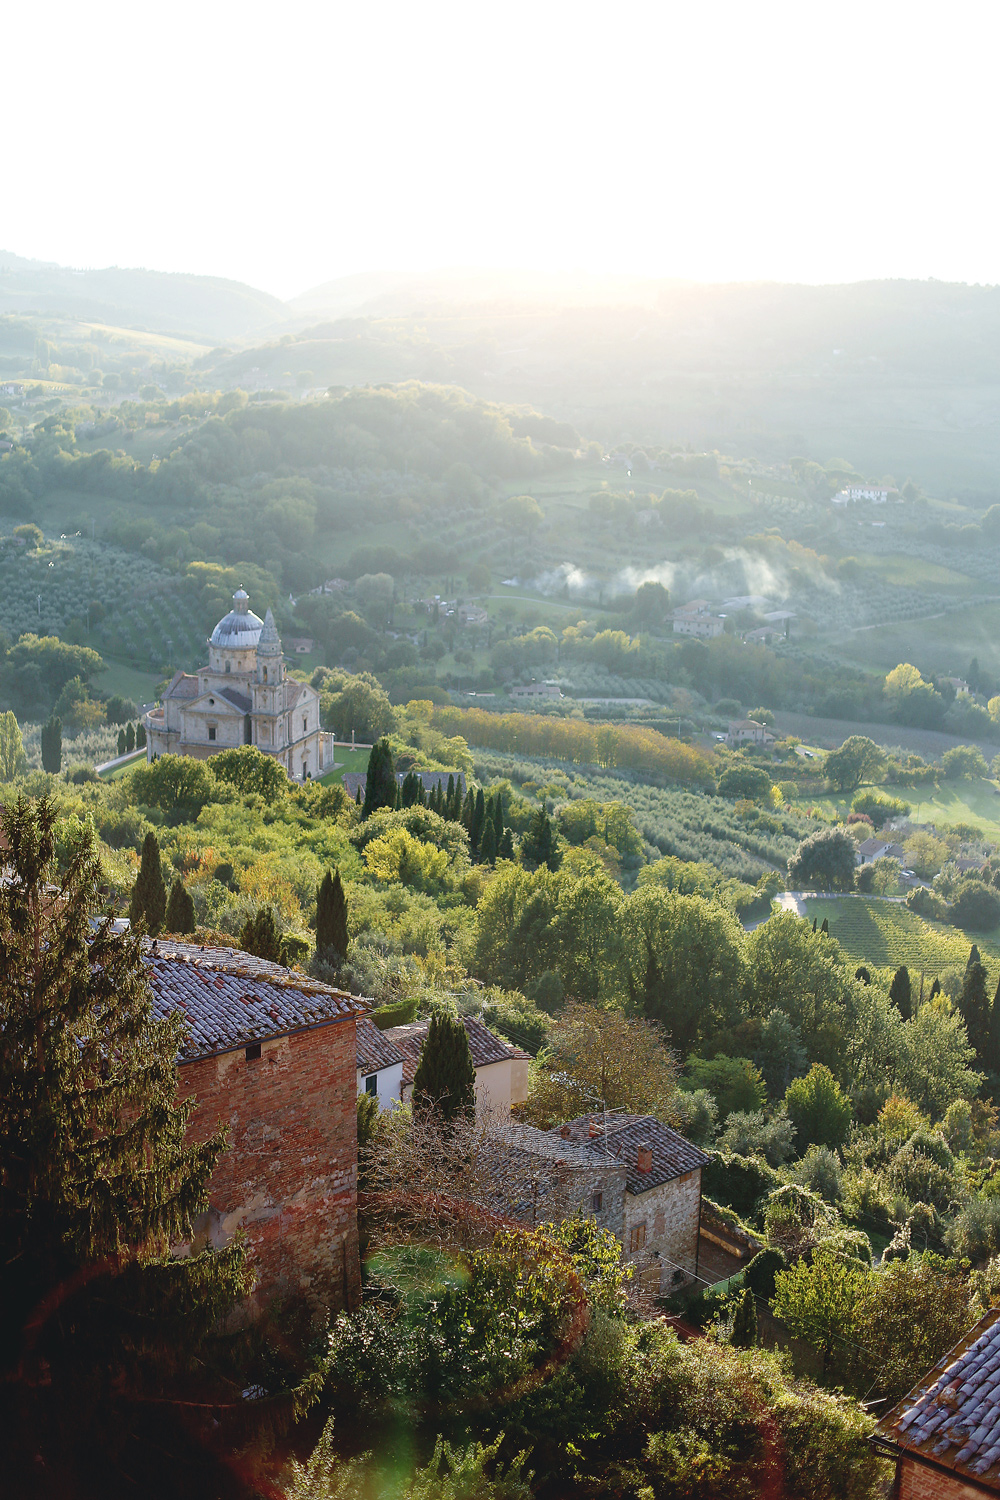 The ultimate 3 week itinerary to Italy